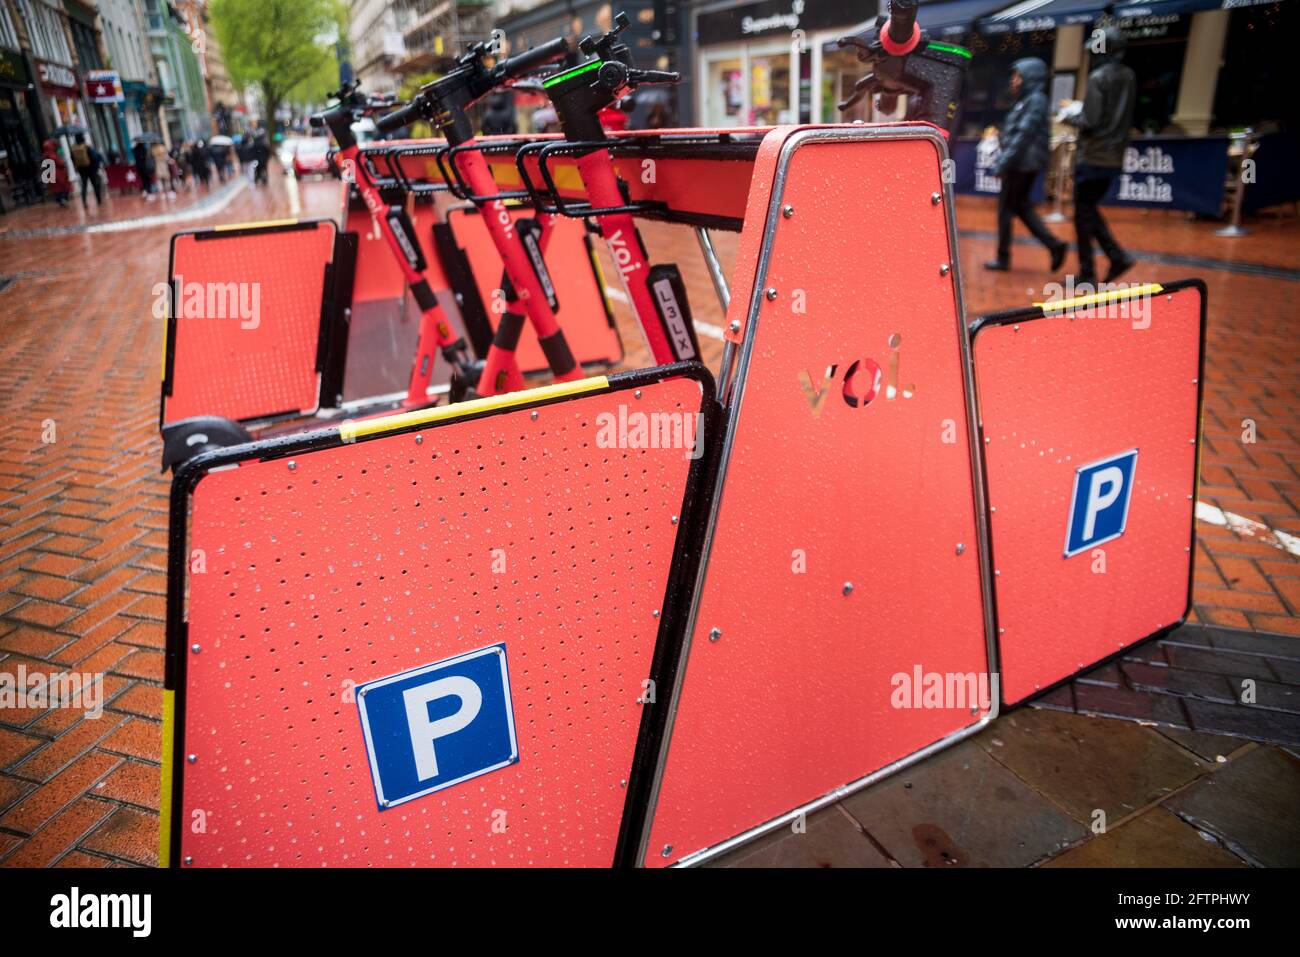 Birmingham, UK. 21st May 2021: Voi, the Swedish e-scooter provider, has introduced scooter racks in cities across the UK to reduce trip hazards and to encourage better parking behaviour amongst its users. Credit: Ryan Underwood / Alamy Live News Stock Photo